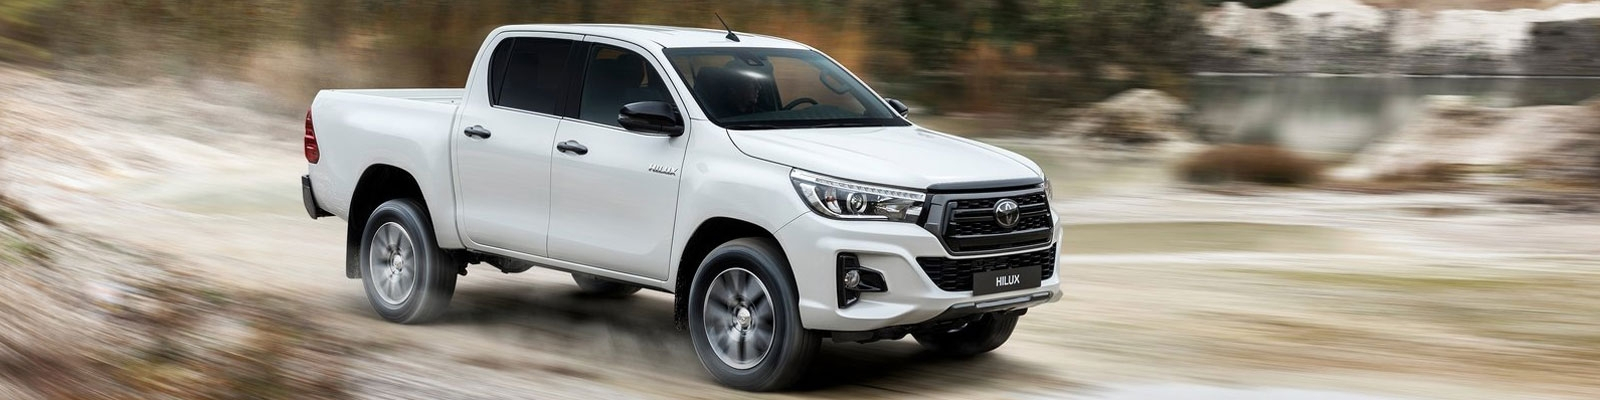 Accessories for Toyota Hilux